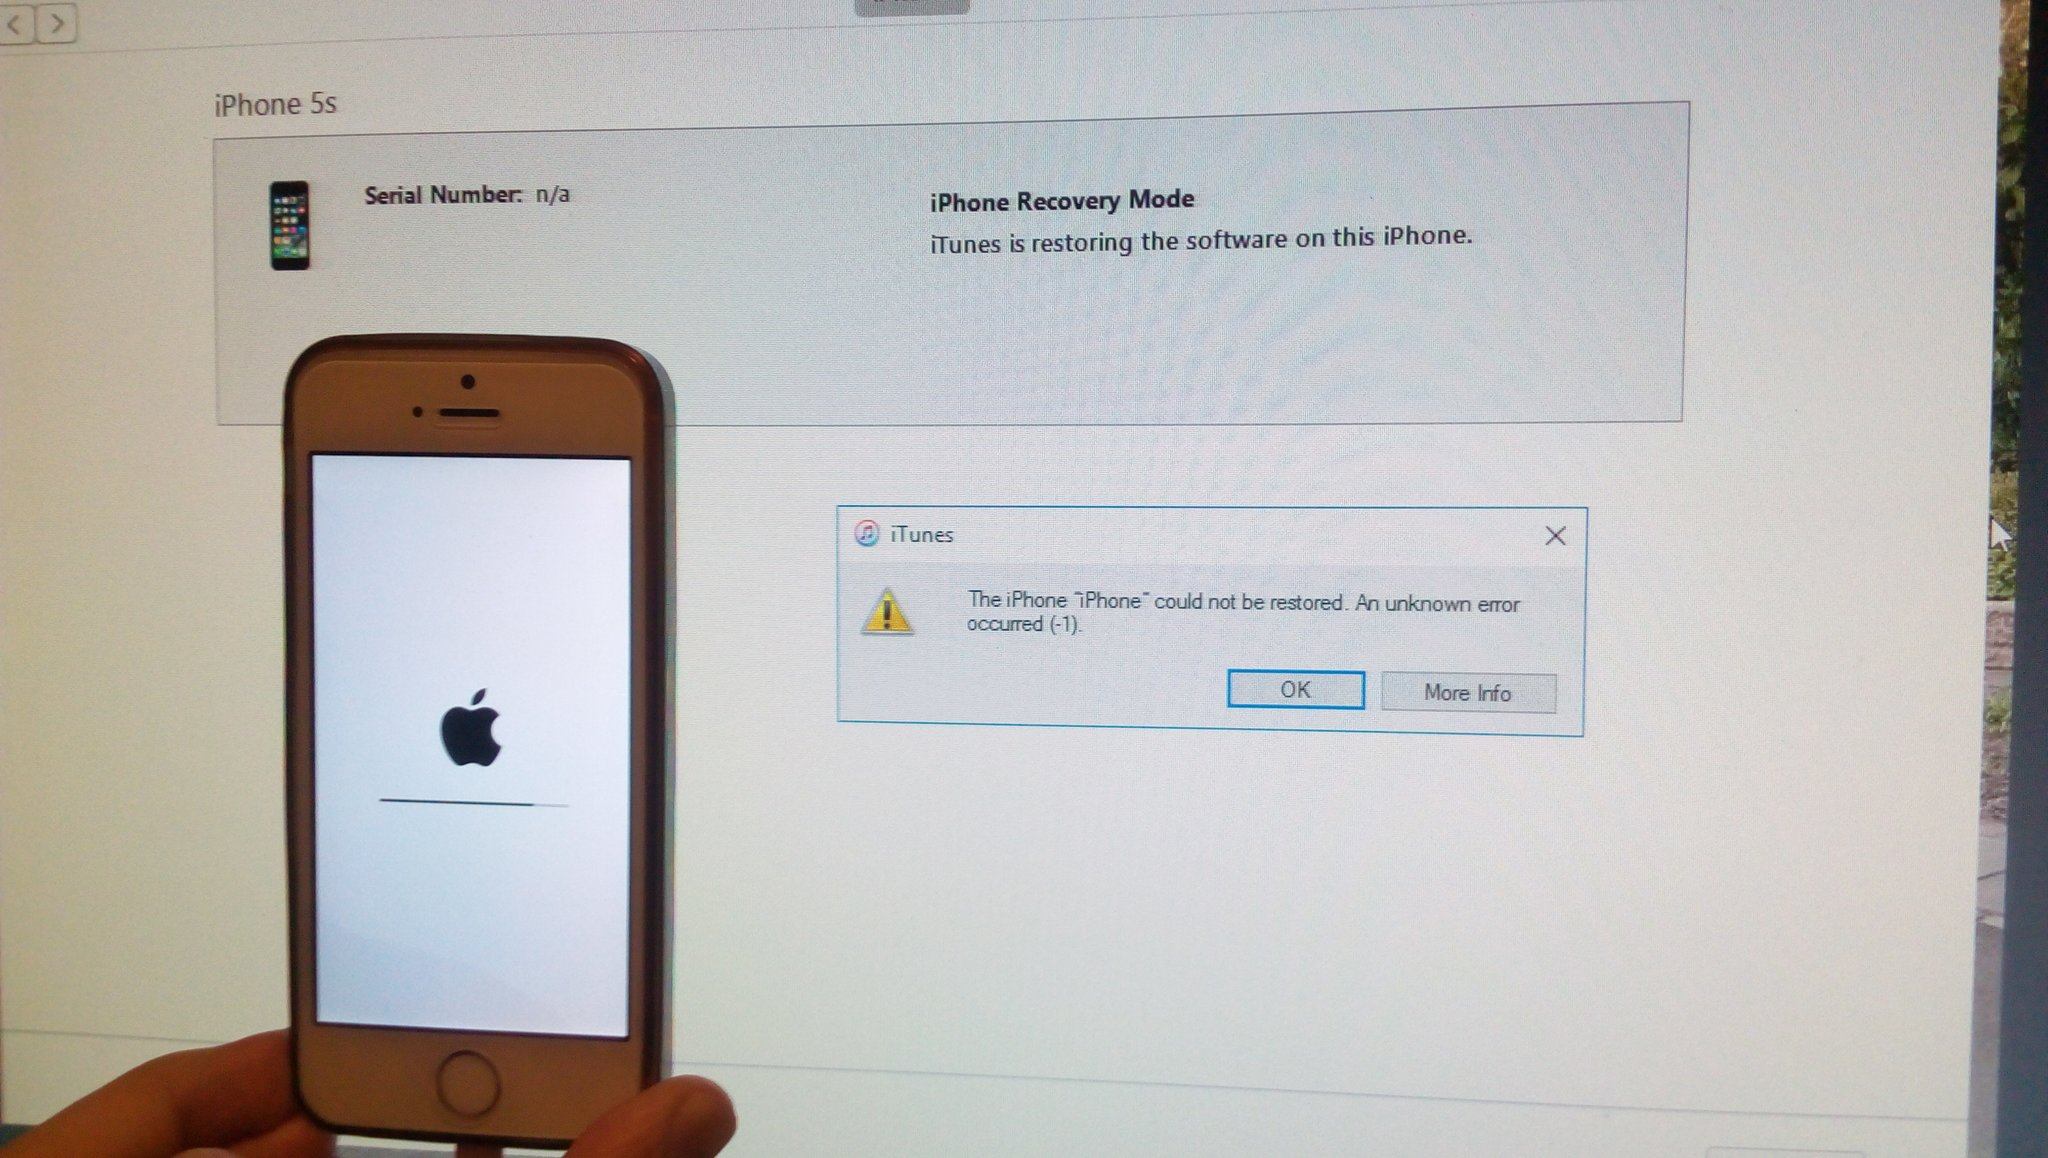 iPhone 5s Update or Recovery error(-1) - Apple Community